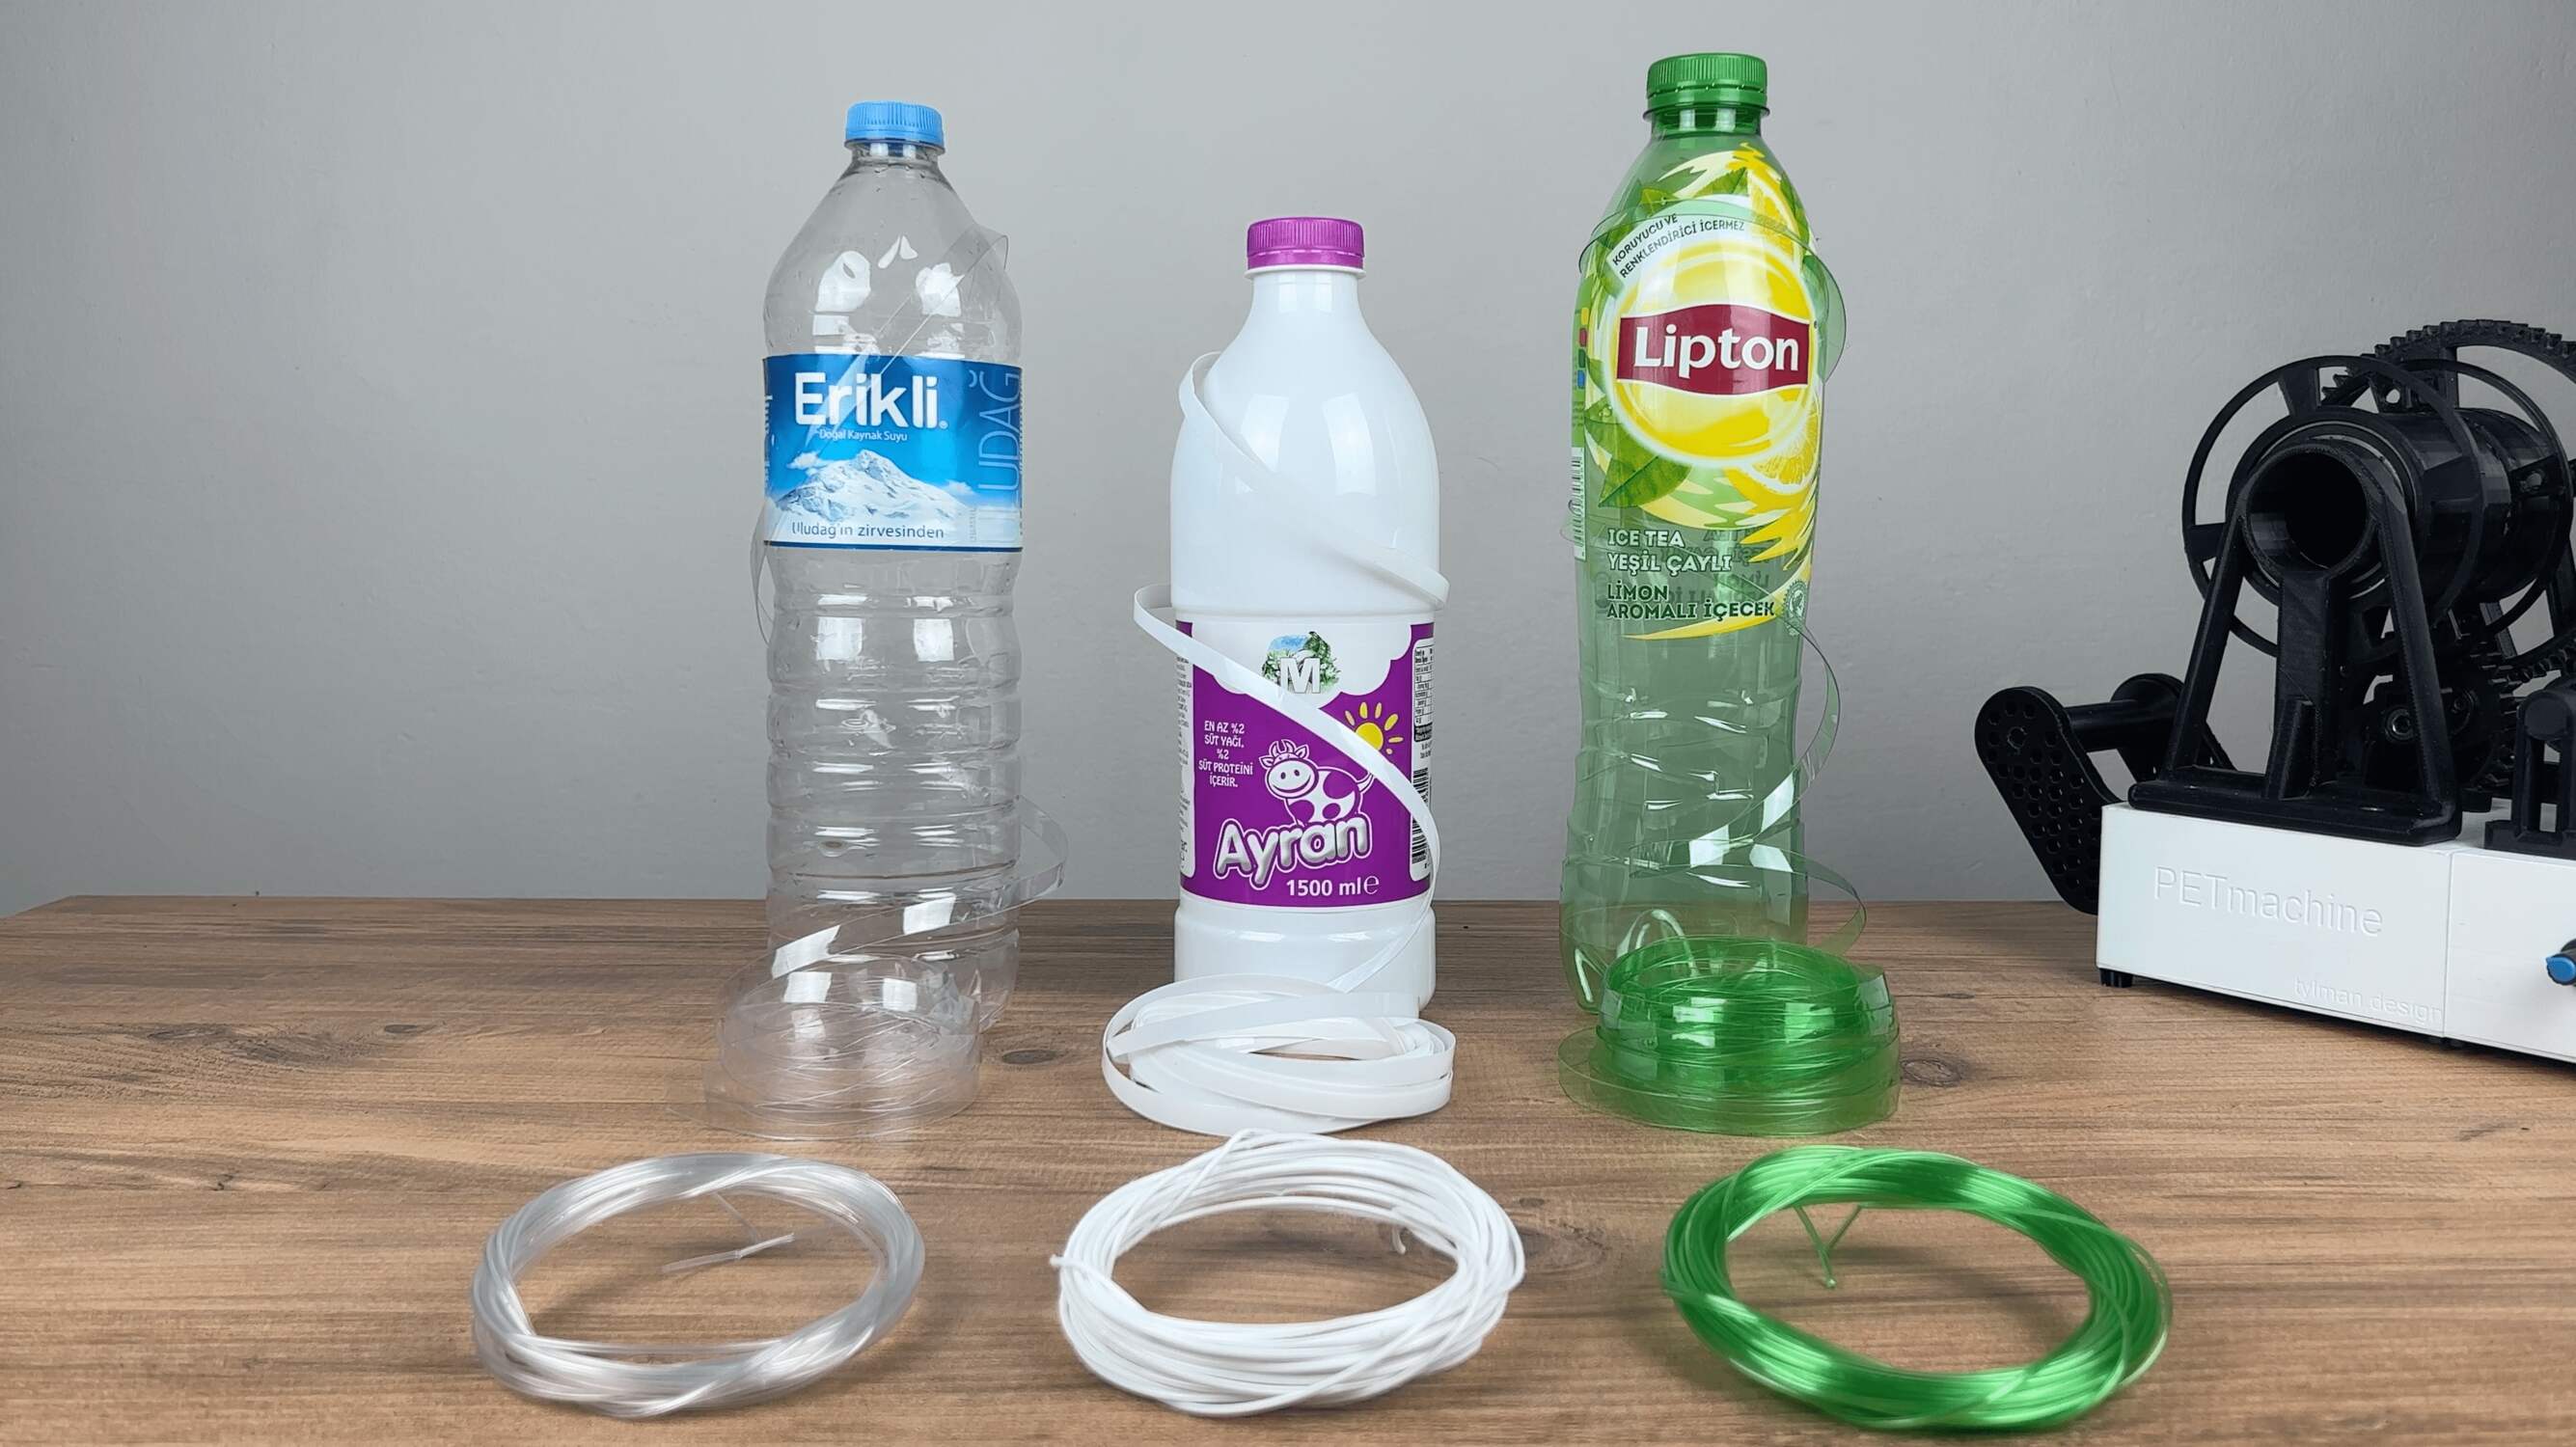 How To Make 3D Printer Filament From Plastic Bottles